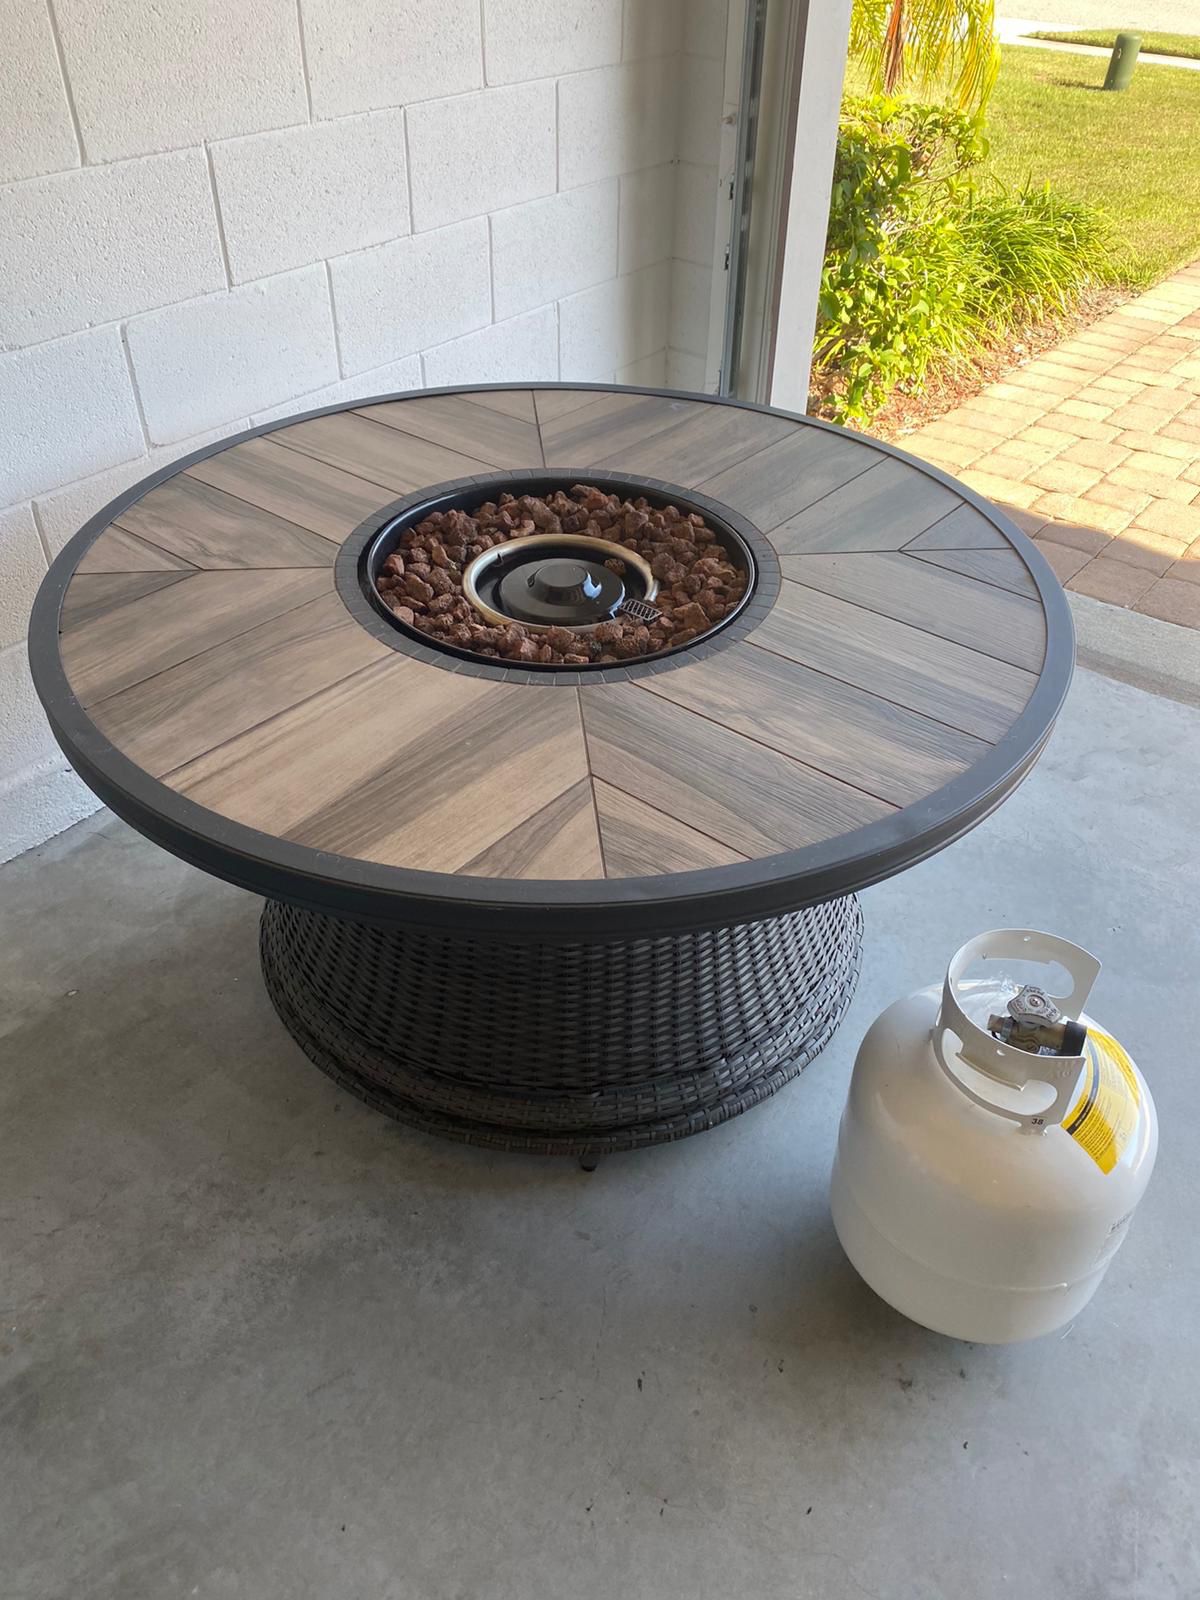 Outdoor Table with fireplace